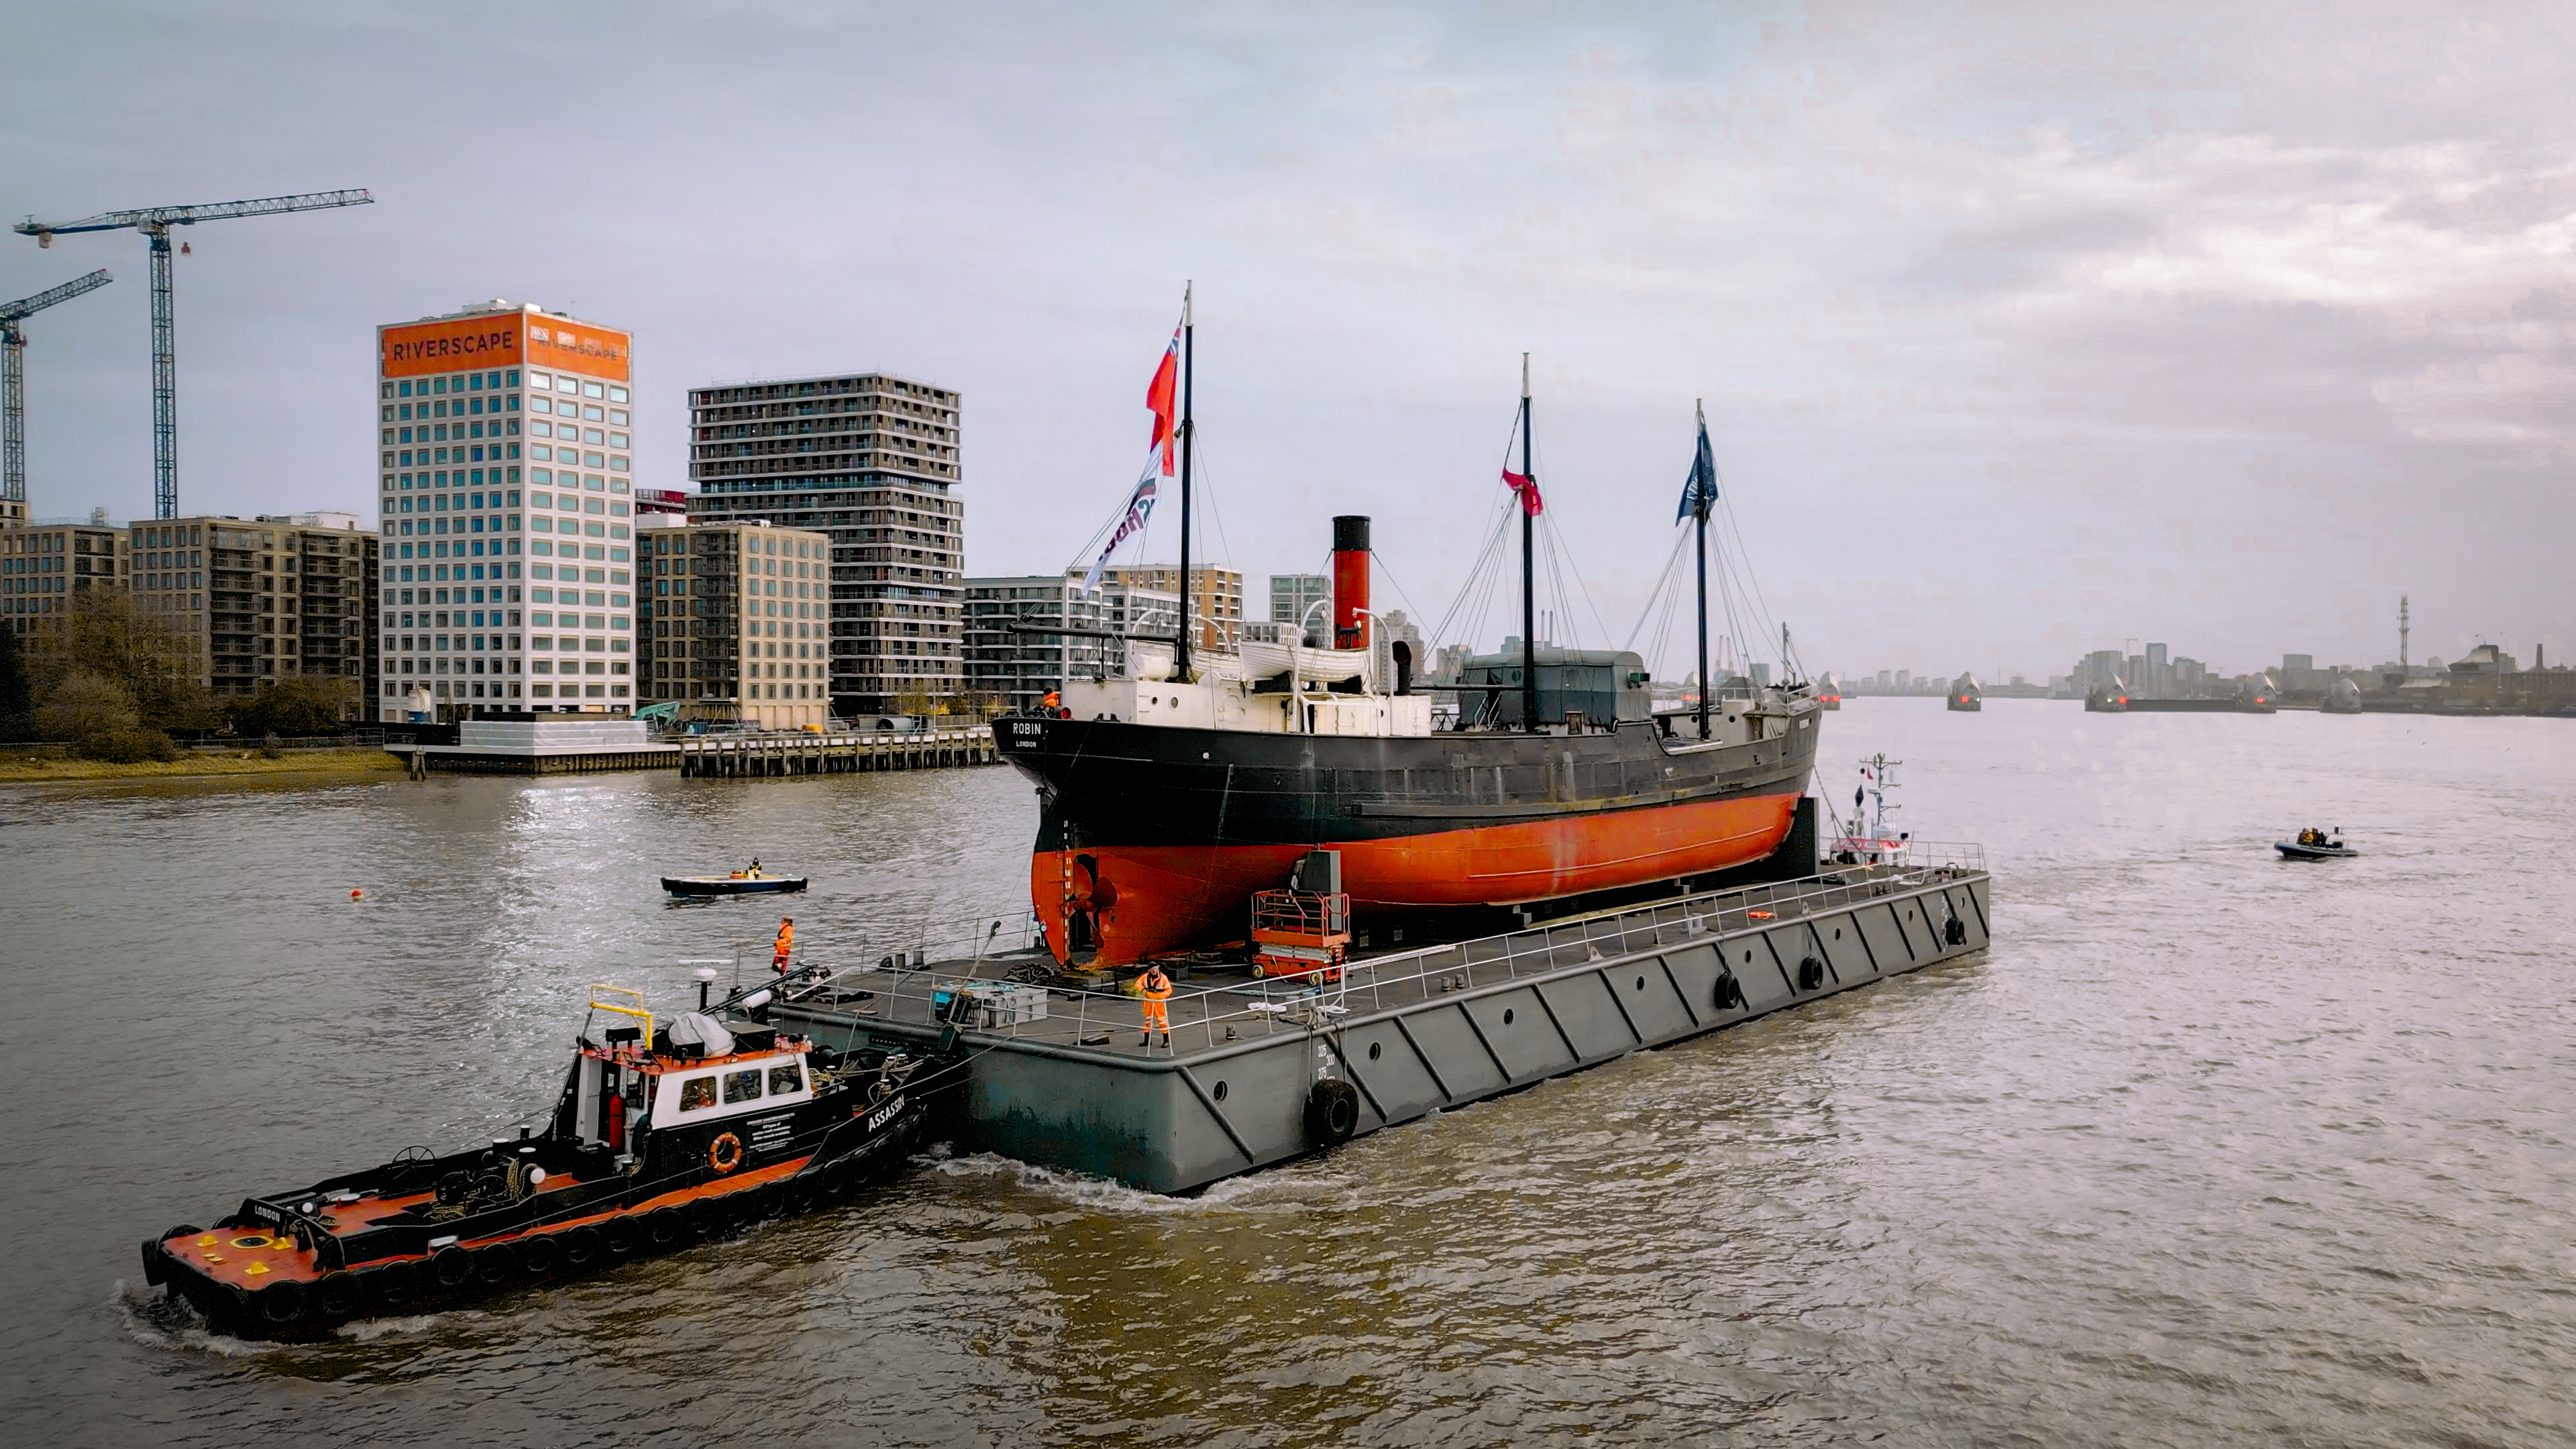 Steamship SS Robin being transported on the Thames to her new home